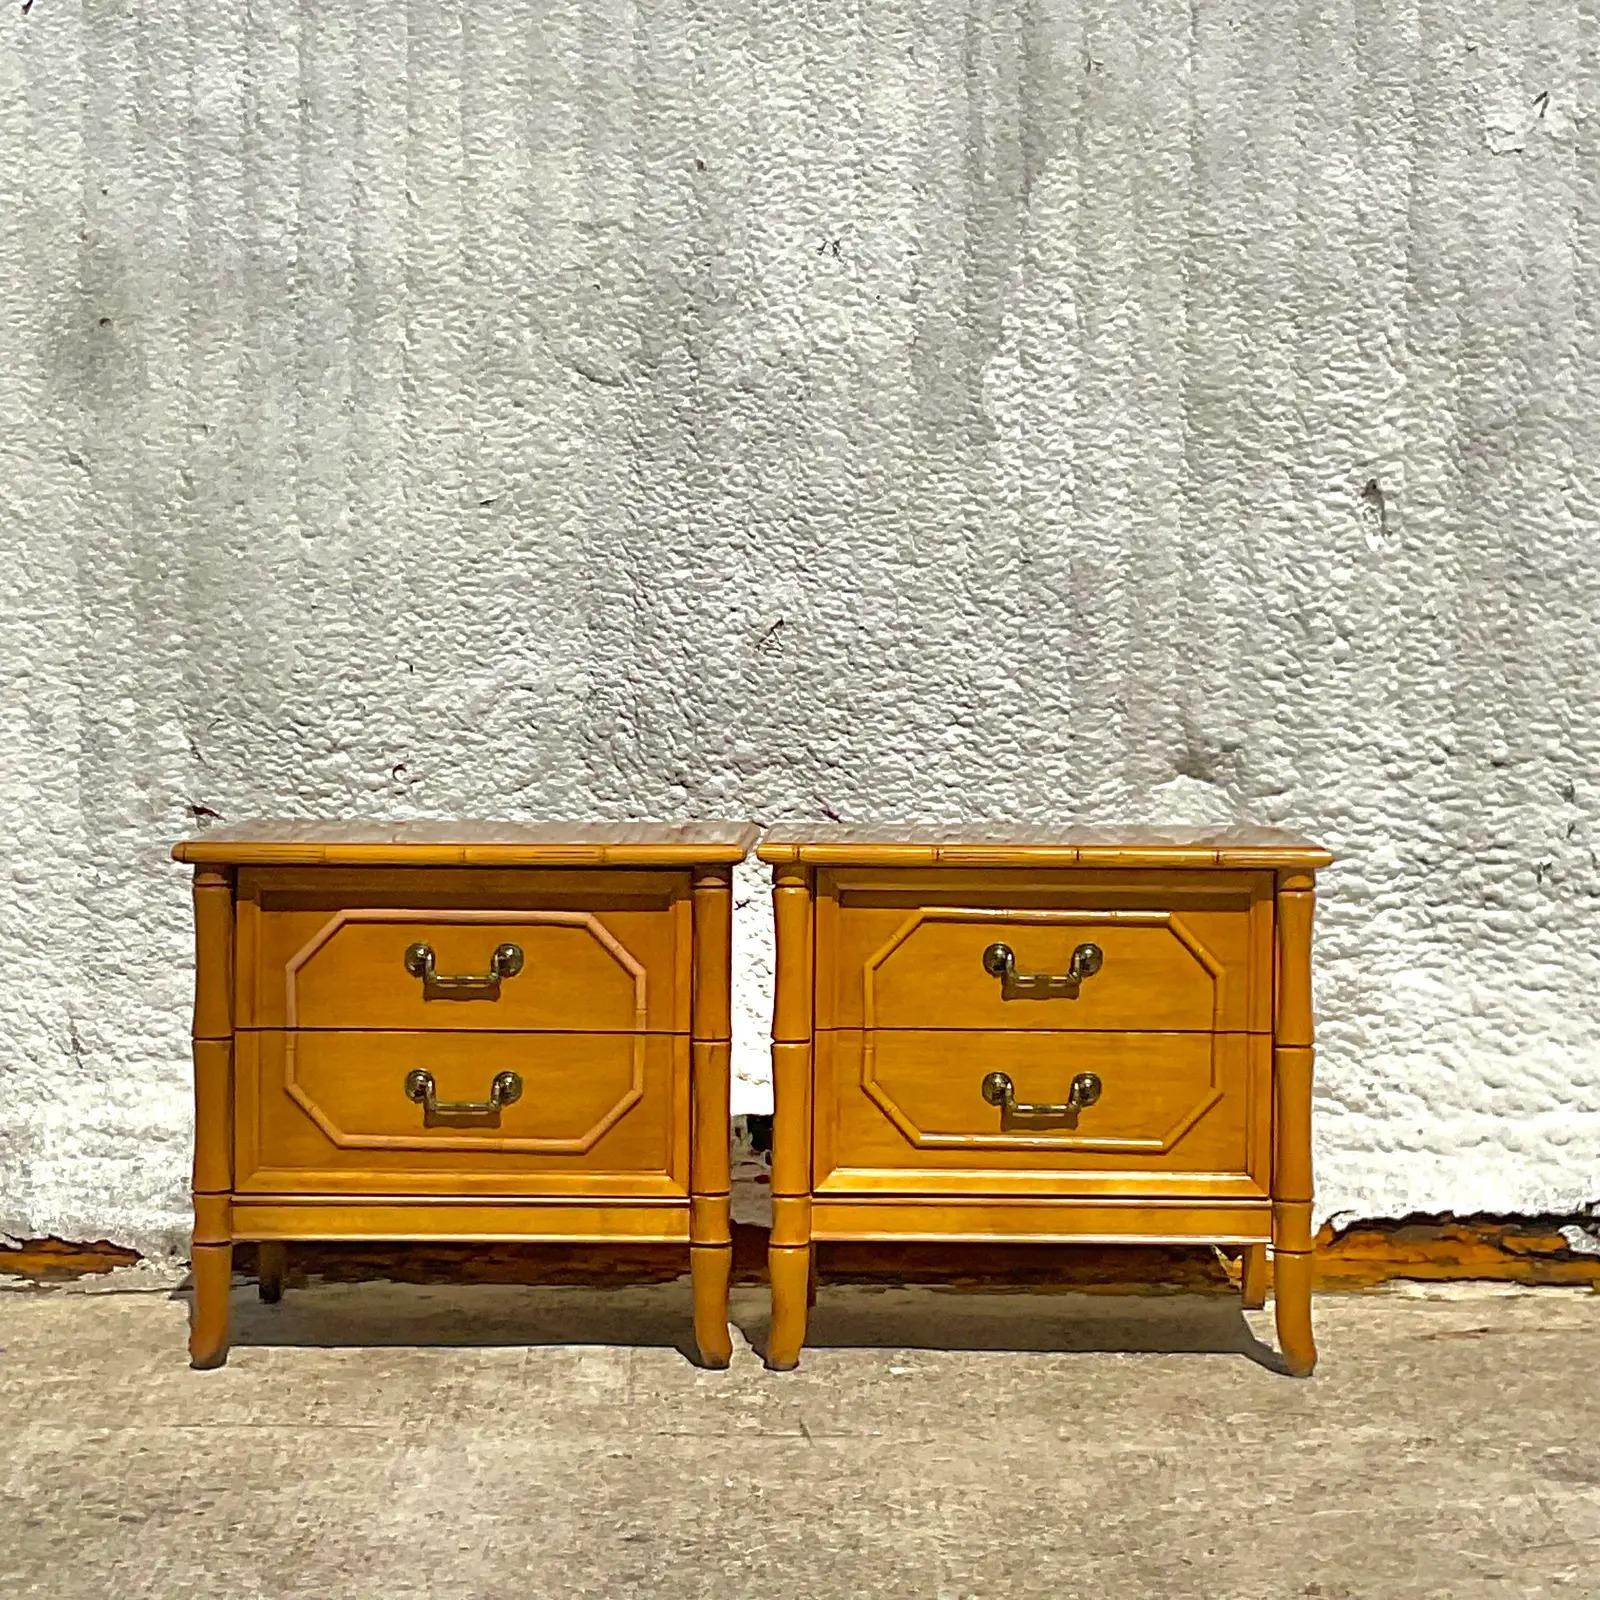 A fantastic vintage Broyhill Furniture faux bamboo nightstands, a great addition to your bedroom. Acquired at a Palm Beach estate.